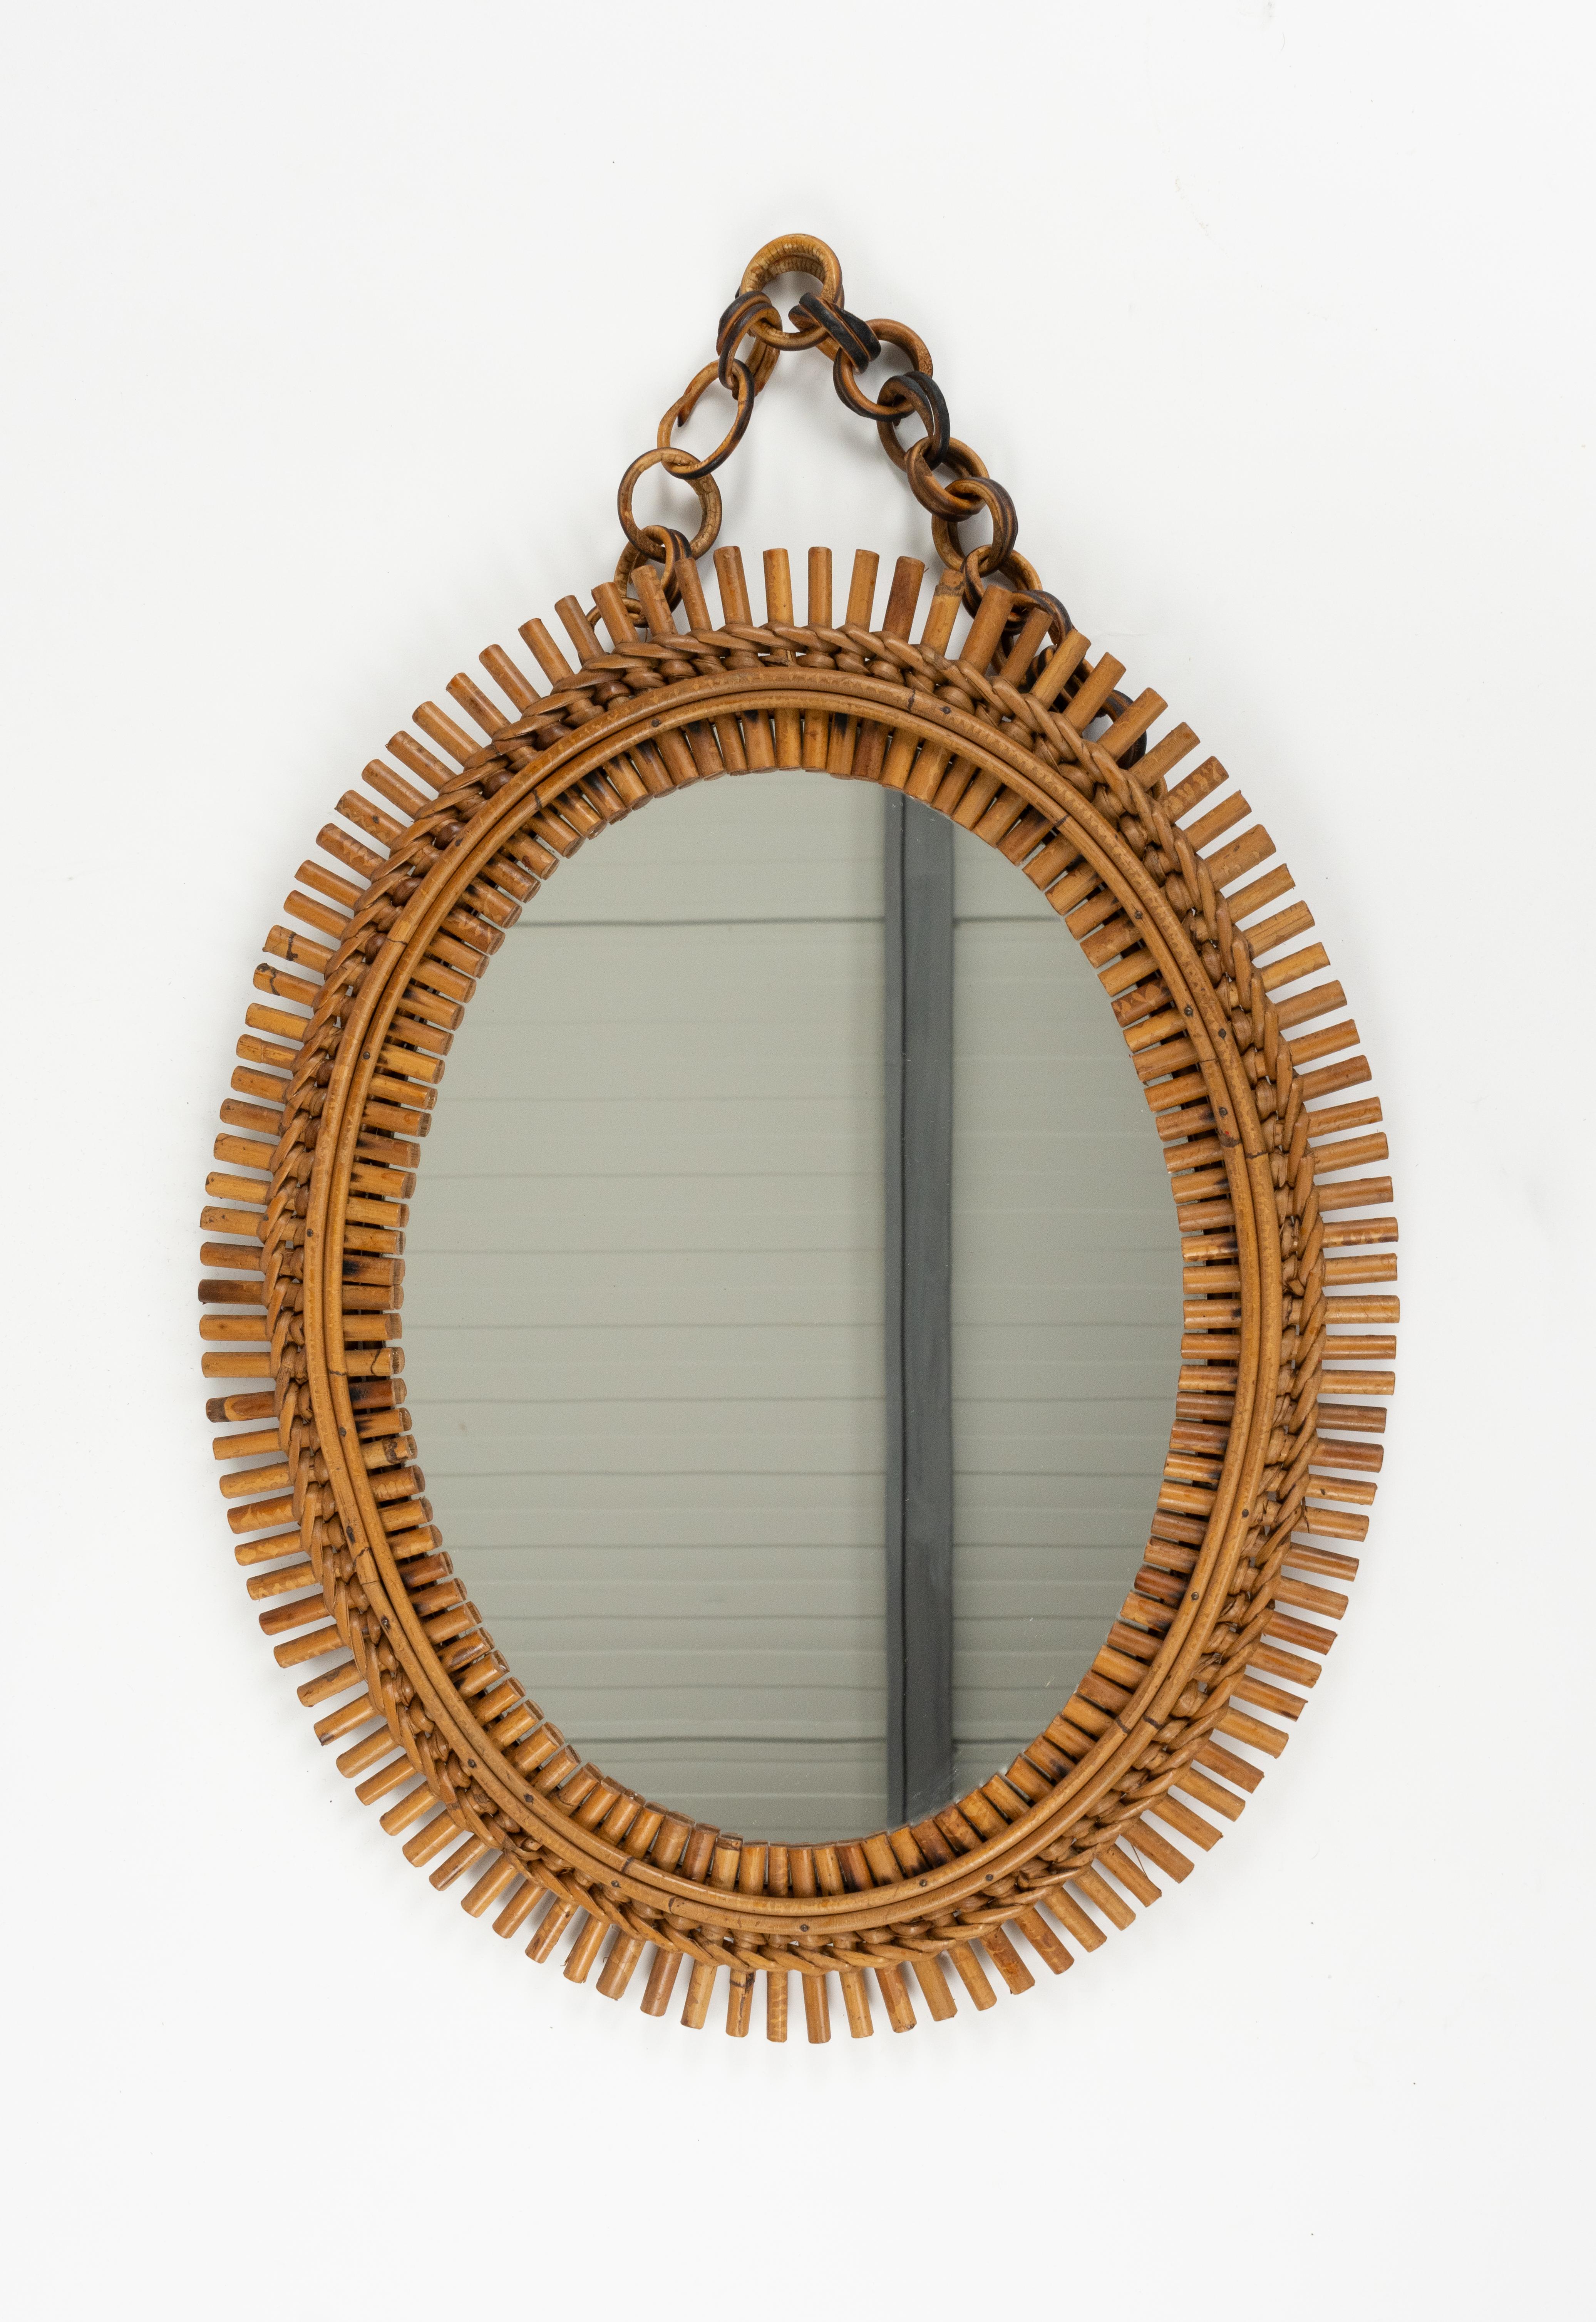 Midcentury Rattan and Bamboo Oval Wall Mirror with Chain, Italy 1960s For Sale 2